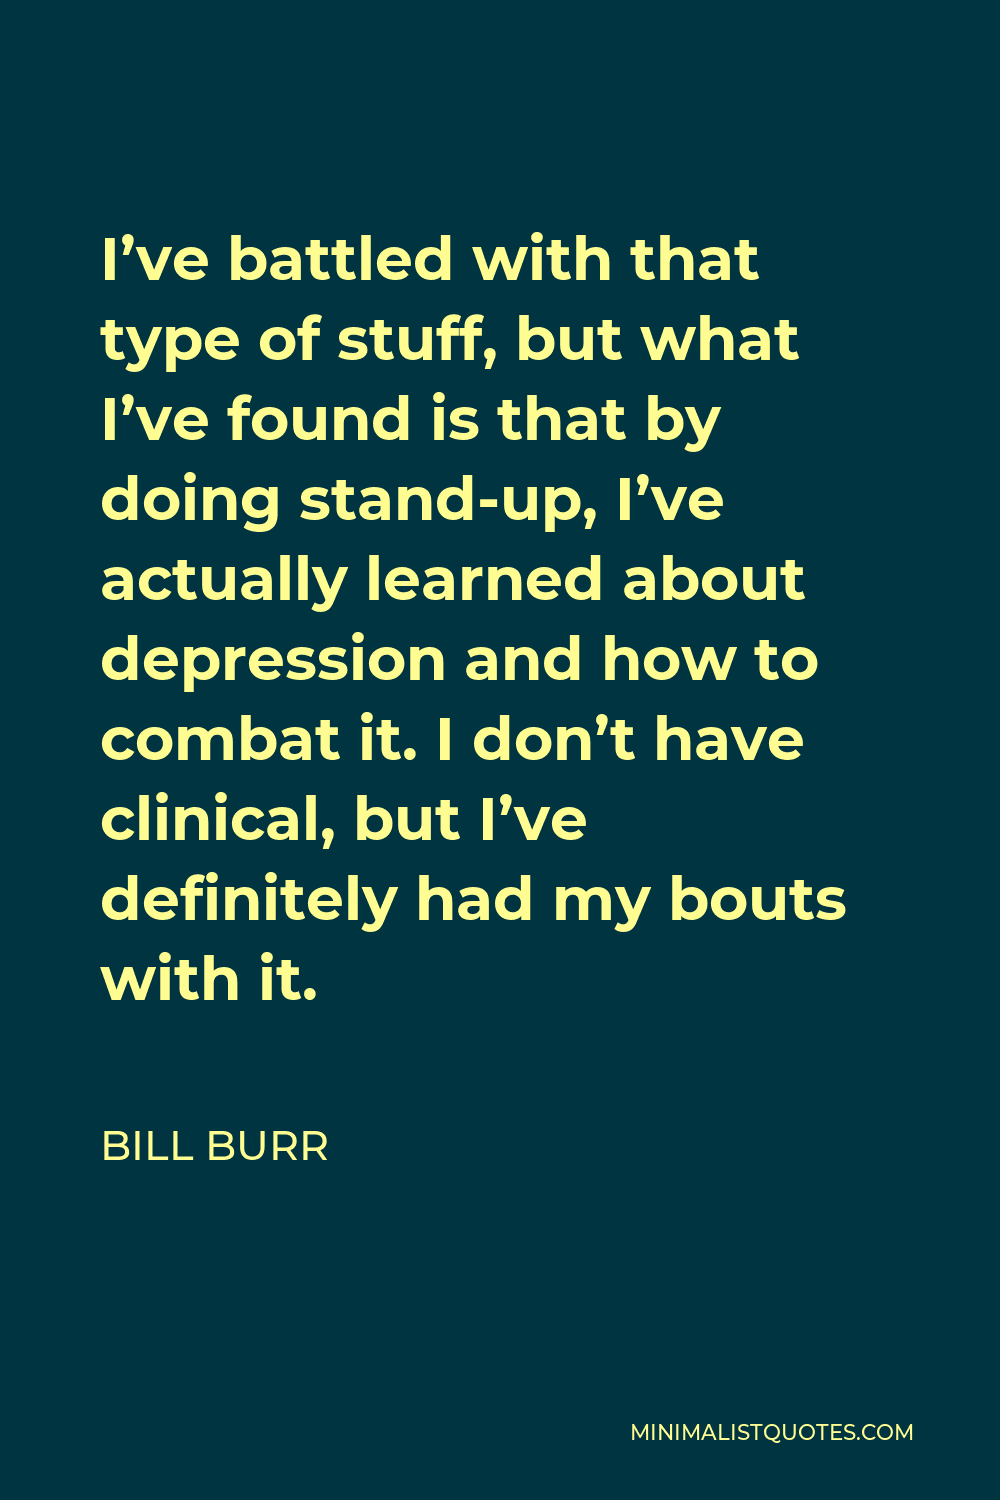 Bill Burr Quote - I’ve battled with that type of stuff, but what I’ve found is that by doing stand-up, I’ve actually learned about depression and how to combat it. I don’t have clinical, but I’ve definitely had my bouts with it.